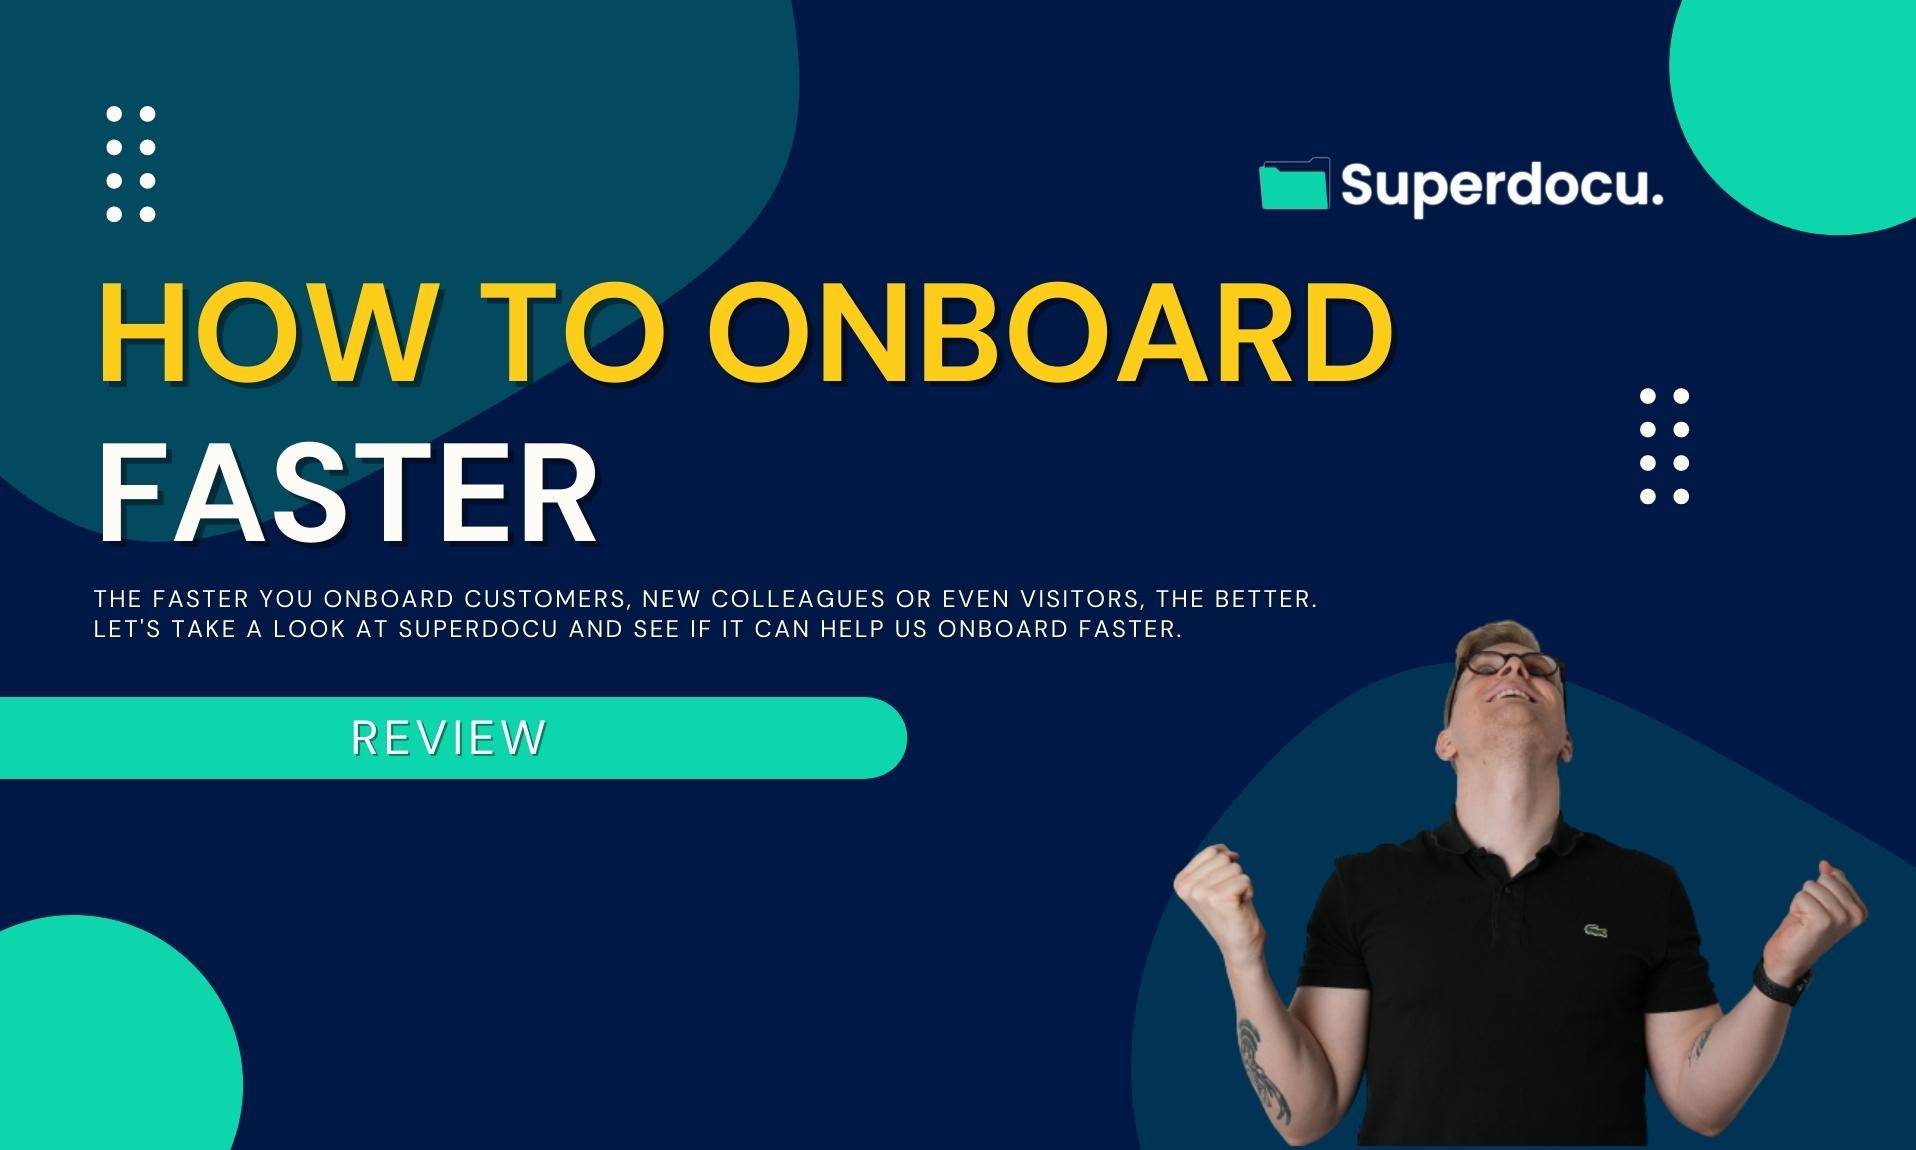 Superdocu review - Onboard clients and colleagues faster